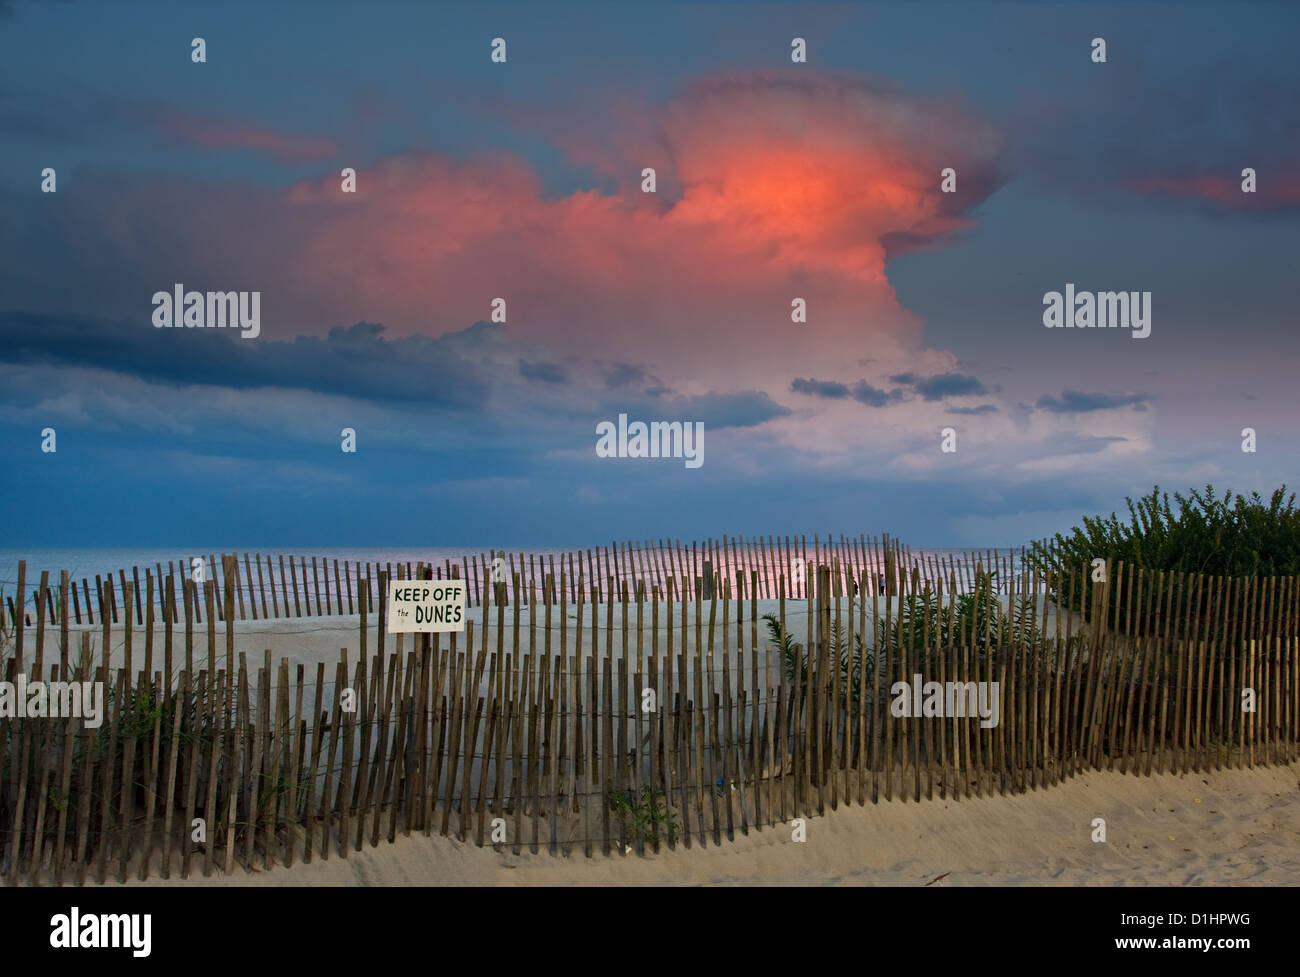 An evening scene at the beach. The last rays of light are dramatically lighting the clouds in the sky of a nearby thunderstorm. Stock Photo